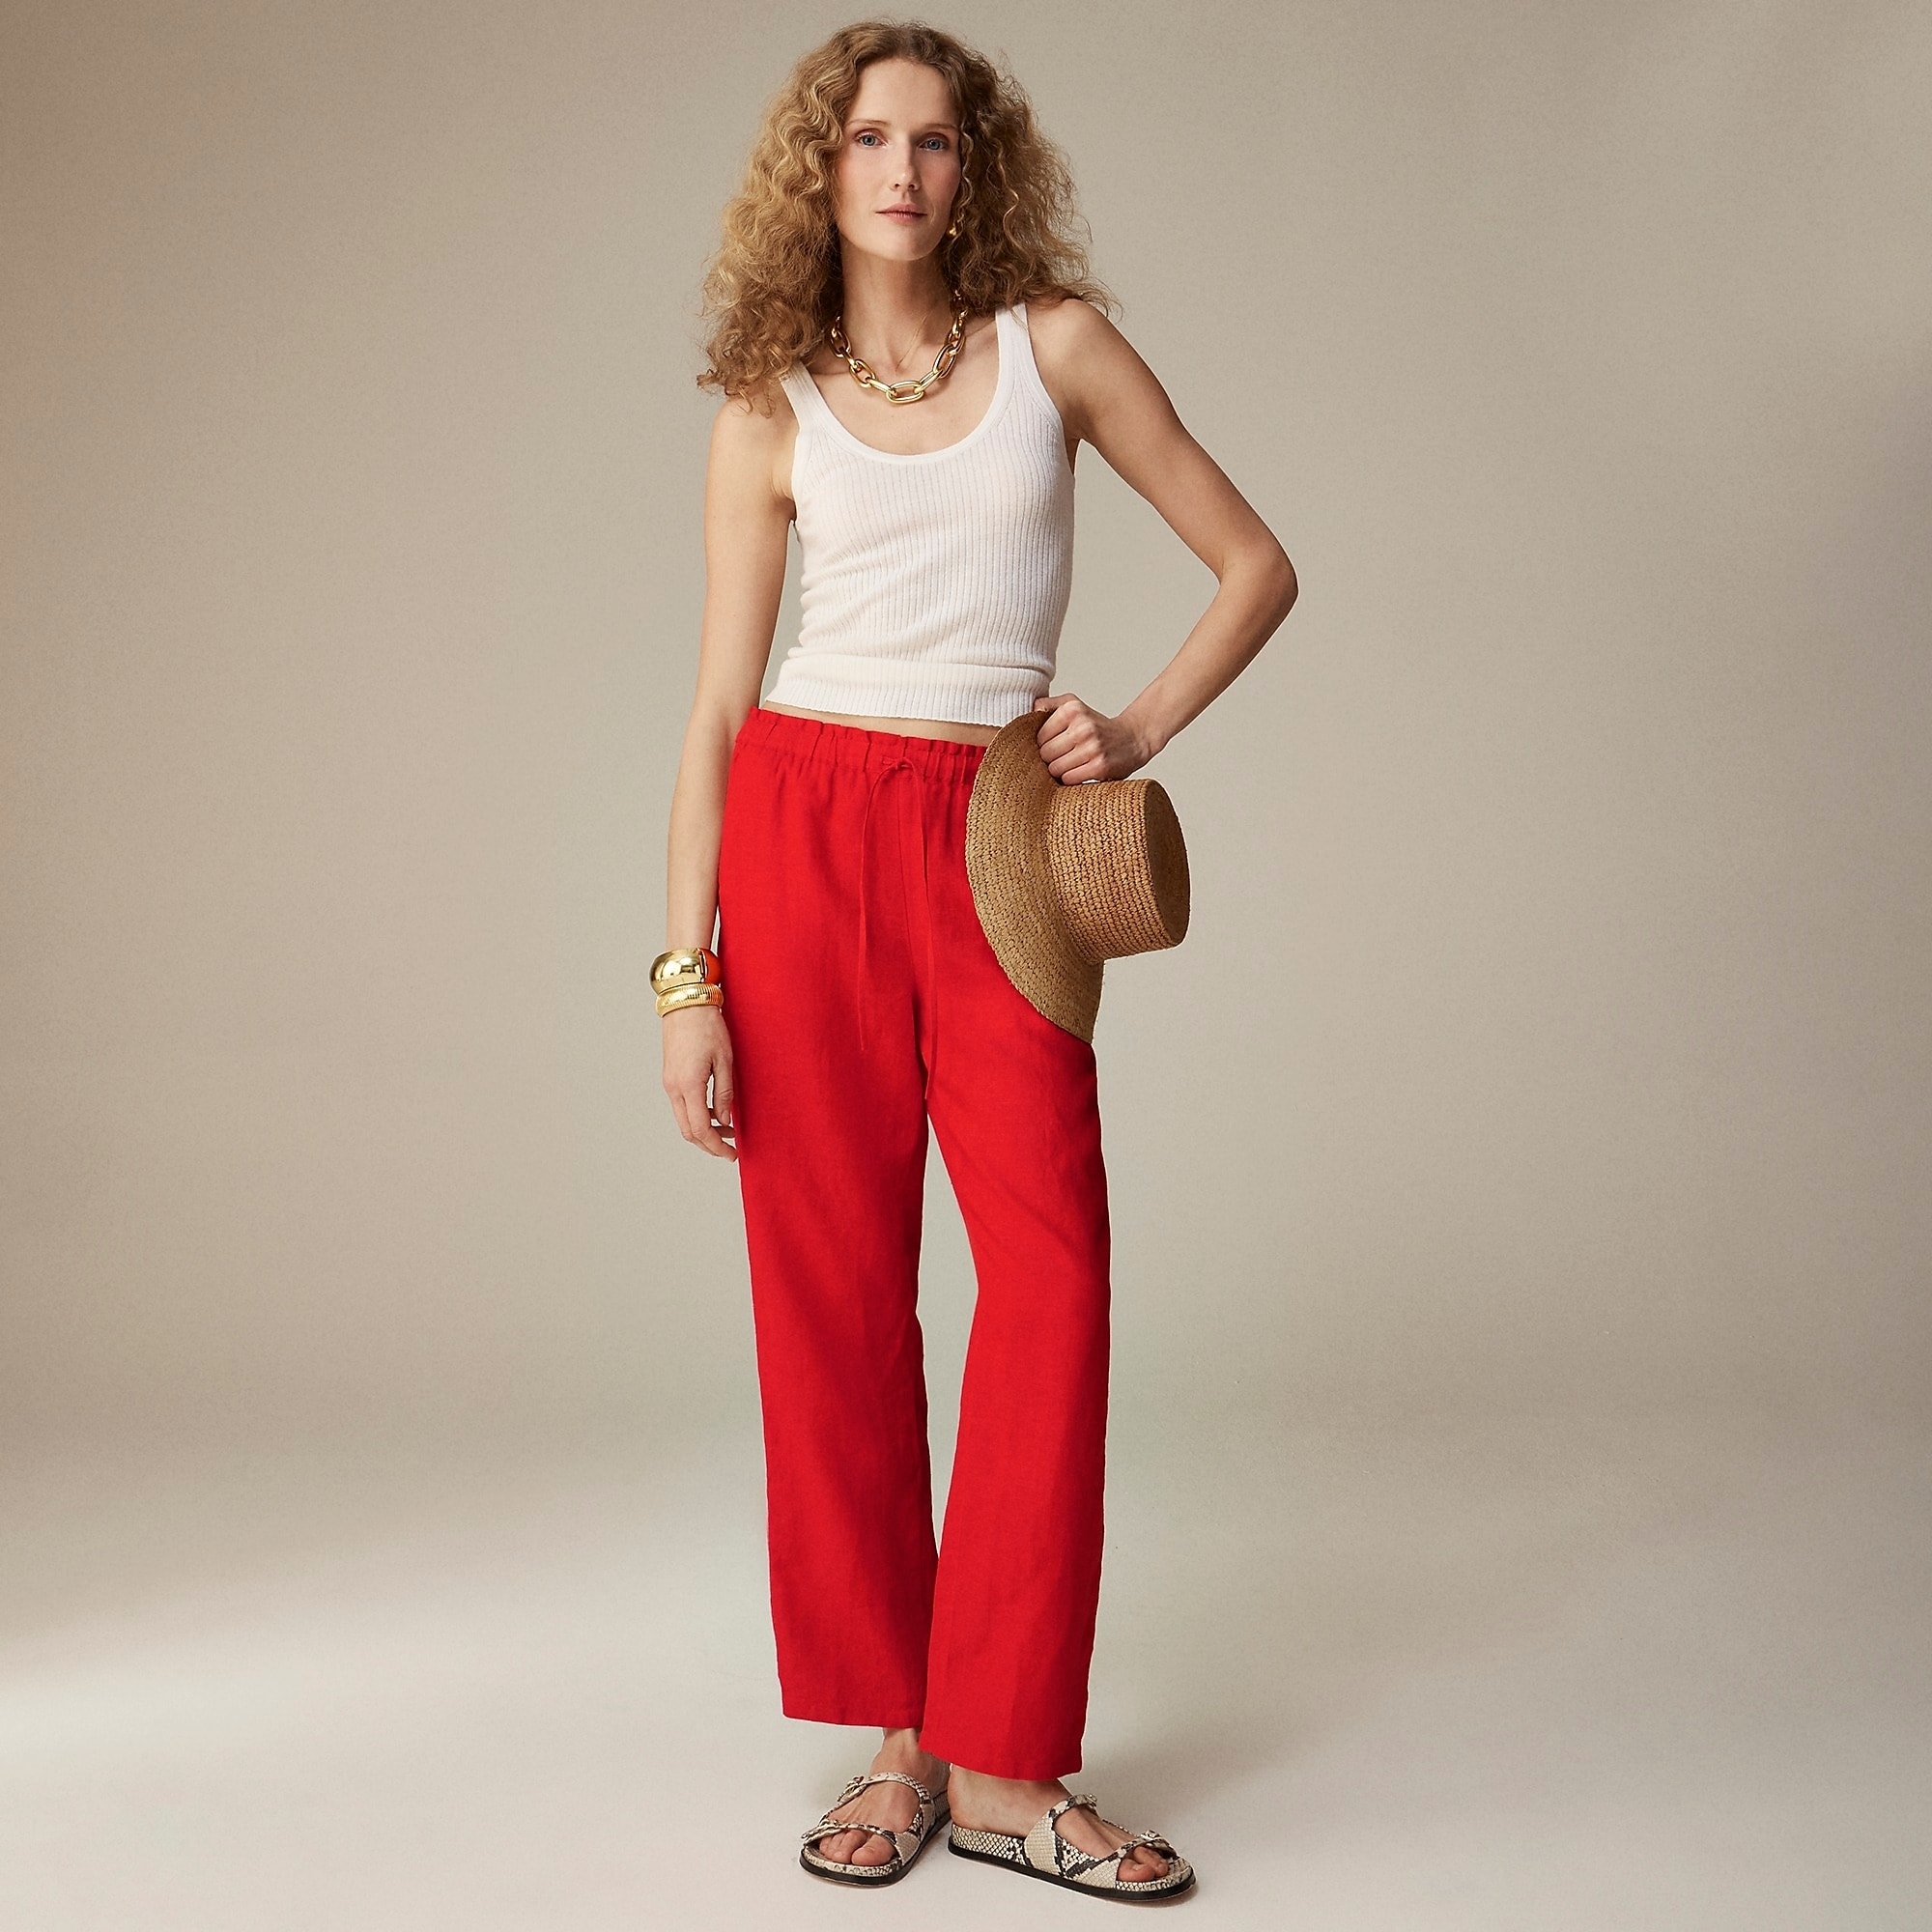 Woman in a white tank top, red trousers, and sandals, holding a straw hat, posing for a fashion article